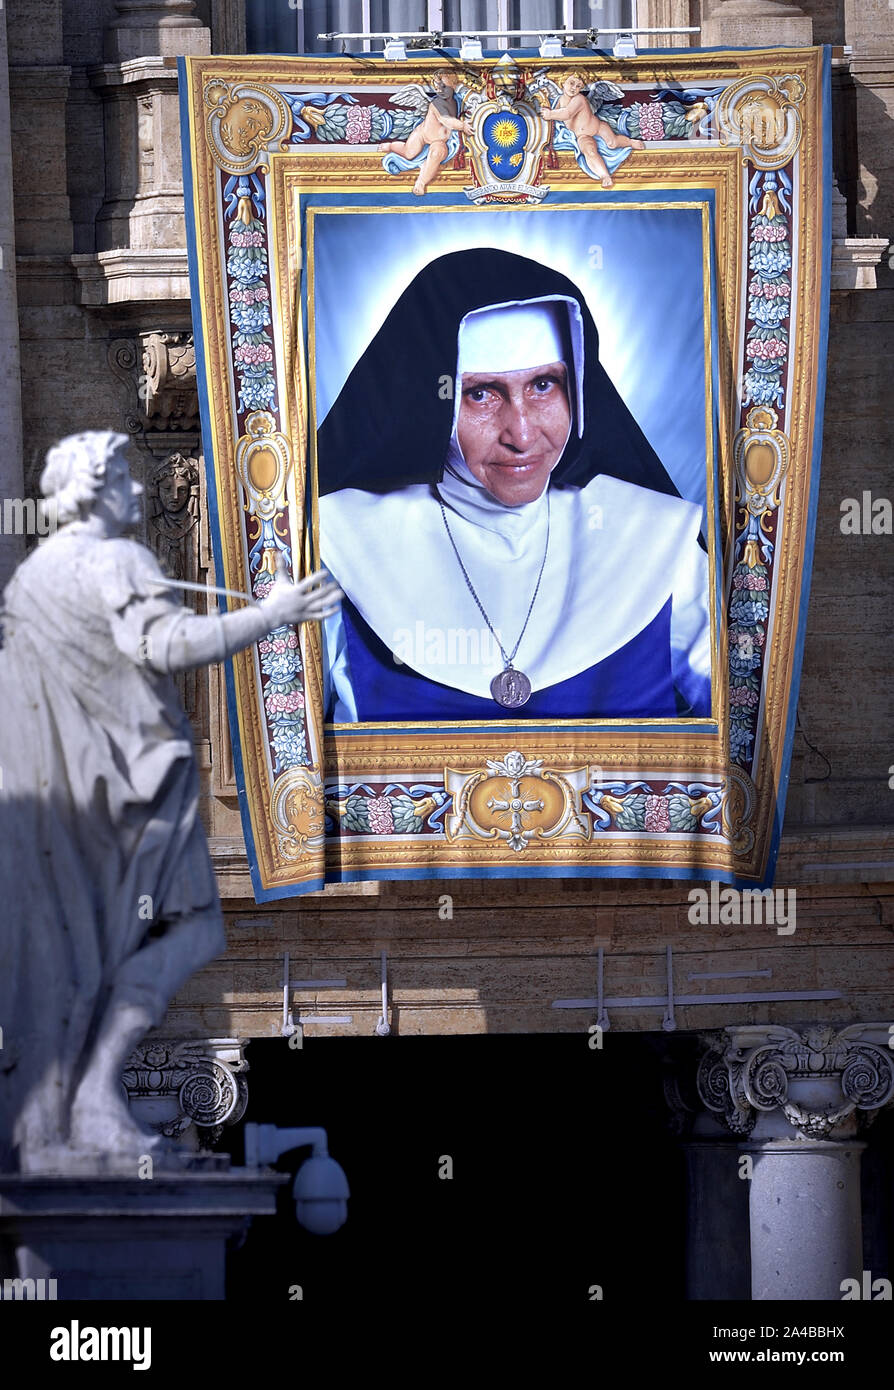 Vatican City, Vatican City. 13th Oct, 2019. Tapestry portraying Dulce Lopes Pontes hangs from the façade of St. Peter's Basilica as Pope Francis celebrates Canonization Mass for Britain John Henry Newman, Italian Giuseppina Vannini, Indian Maria Teresa Chiramel Mankidiyan, Brazilian Dulce Lopes Pontes, and Swiss Margarita Bays on Sunday, October 13, 2019, in Saint Peter's Square at the Vatican. Photo by Sefano Spaziani/UPI Credit: UPI/Alamy Live News Stock Photo